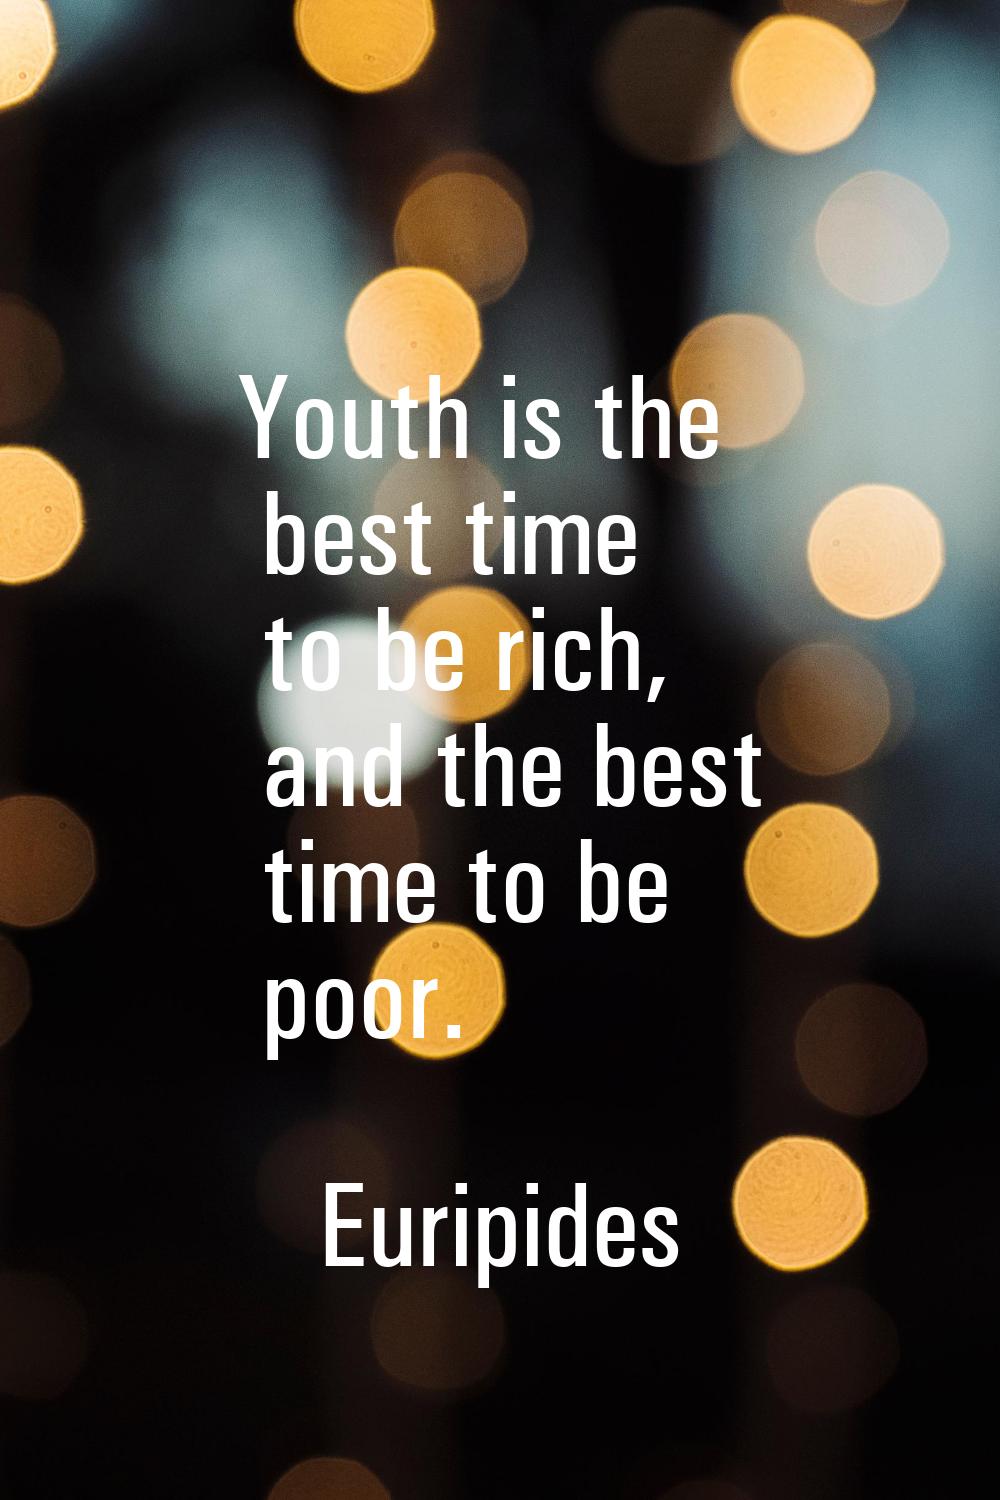 Youth is the best time to be rich, and the best time to be poor.